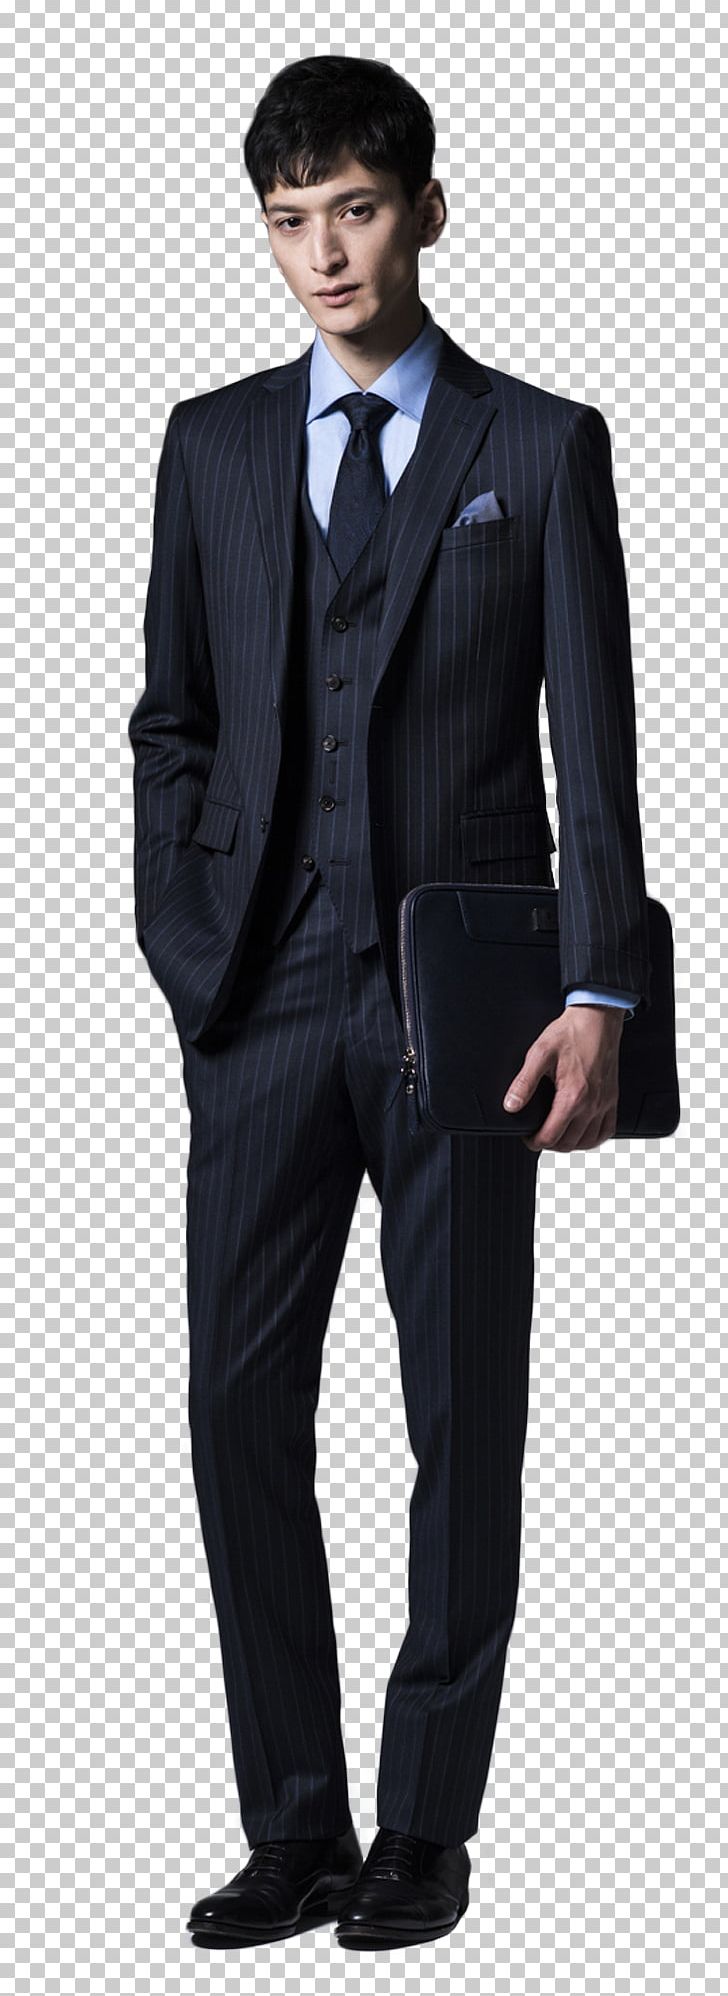 Suit Clothing Waistcoat Gilets Cardigan PNG, Clipart, Business, Businessperson, Cardigan, Clothing, Dress Free PNG Download